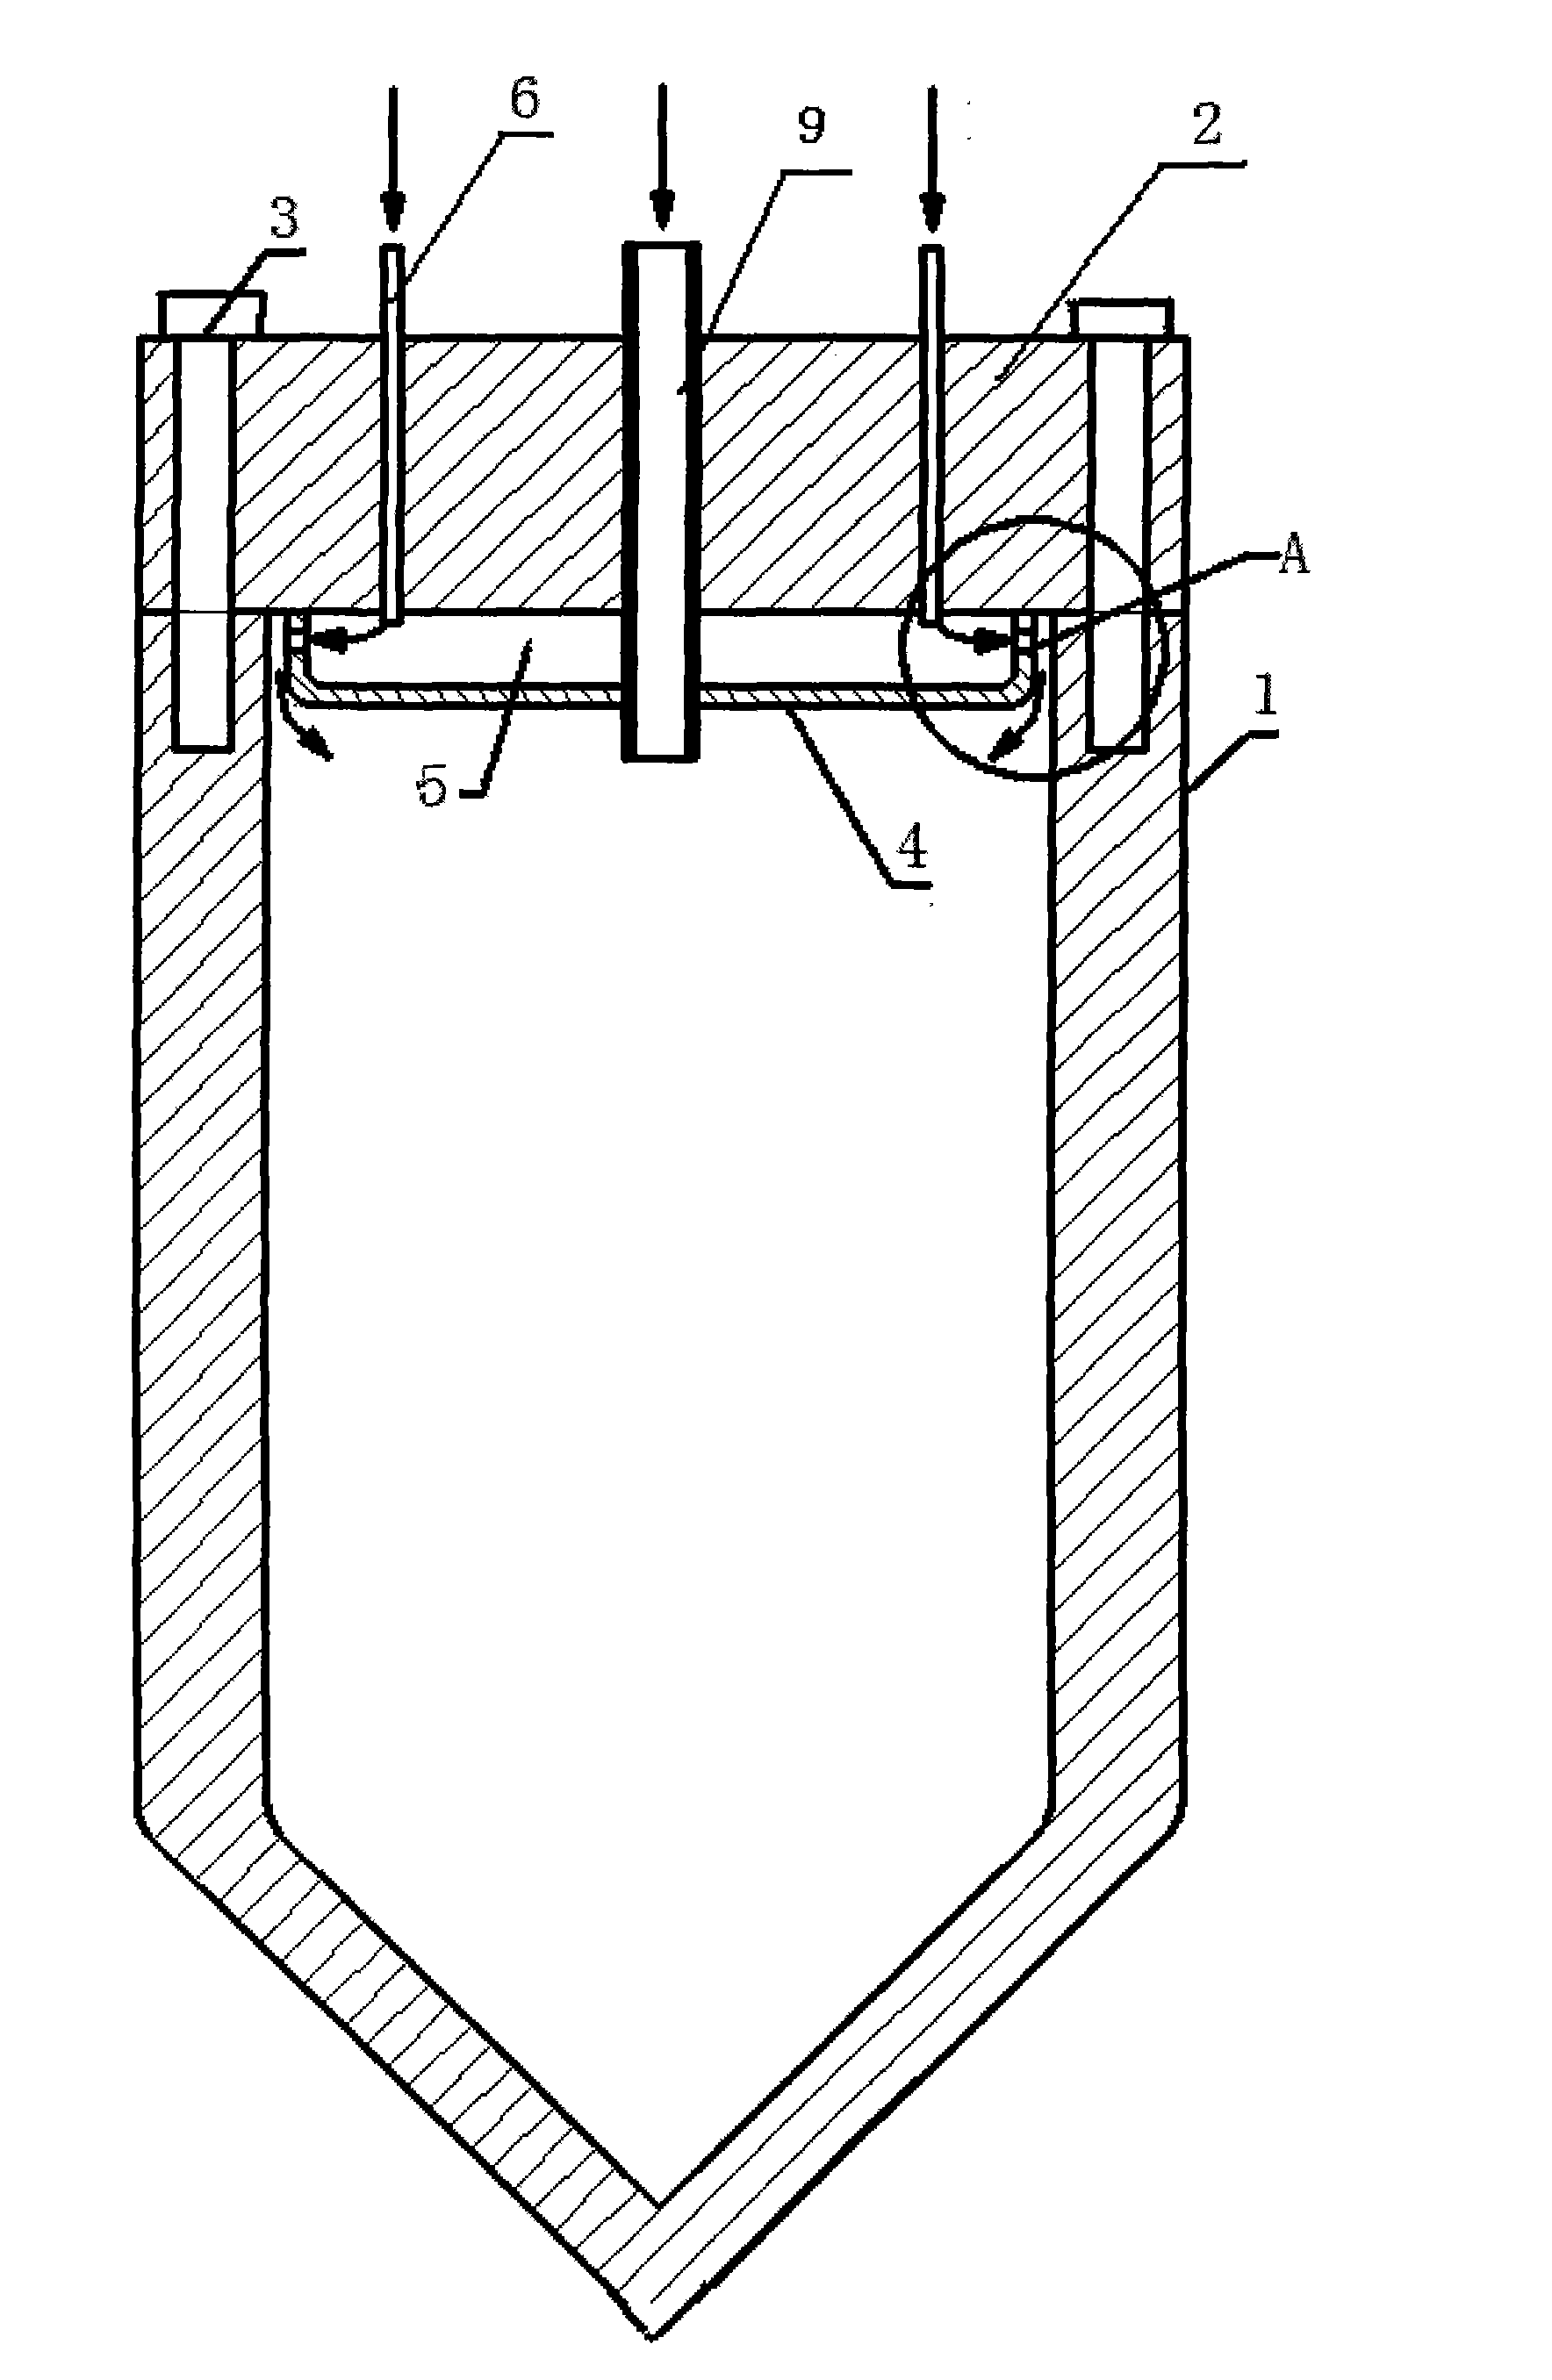 Pressure-bearing device with cooling function for supercritical water treatment